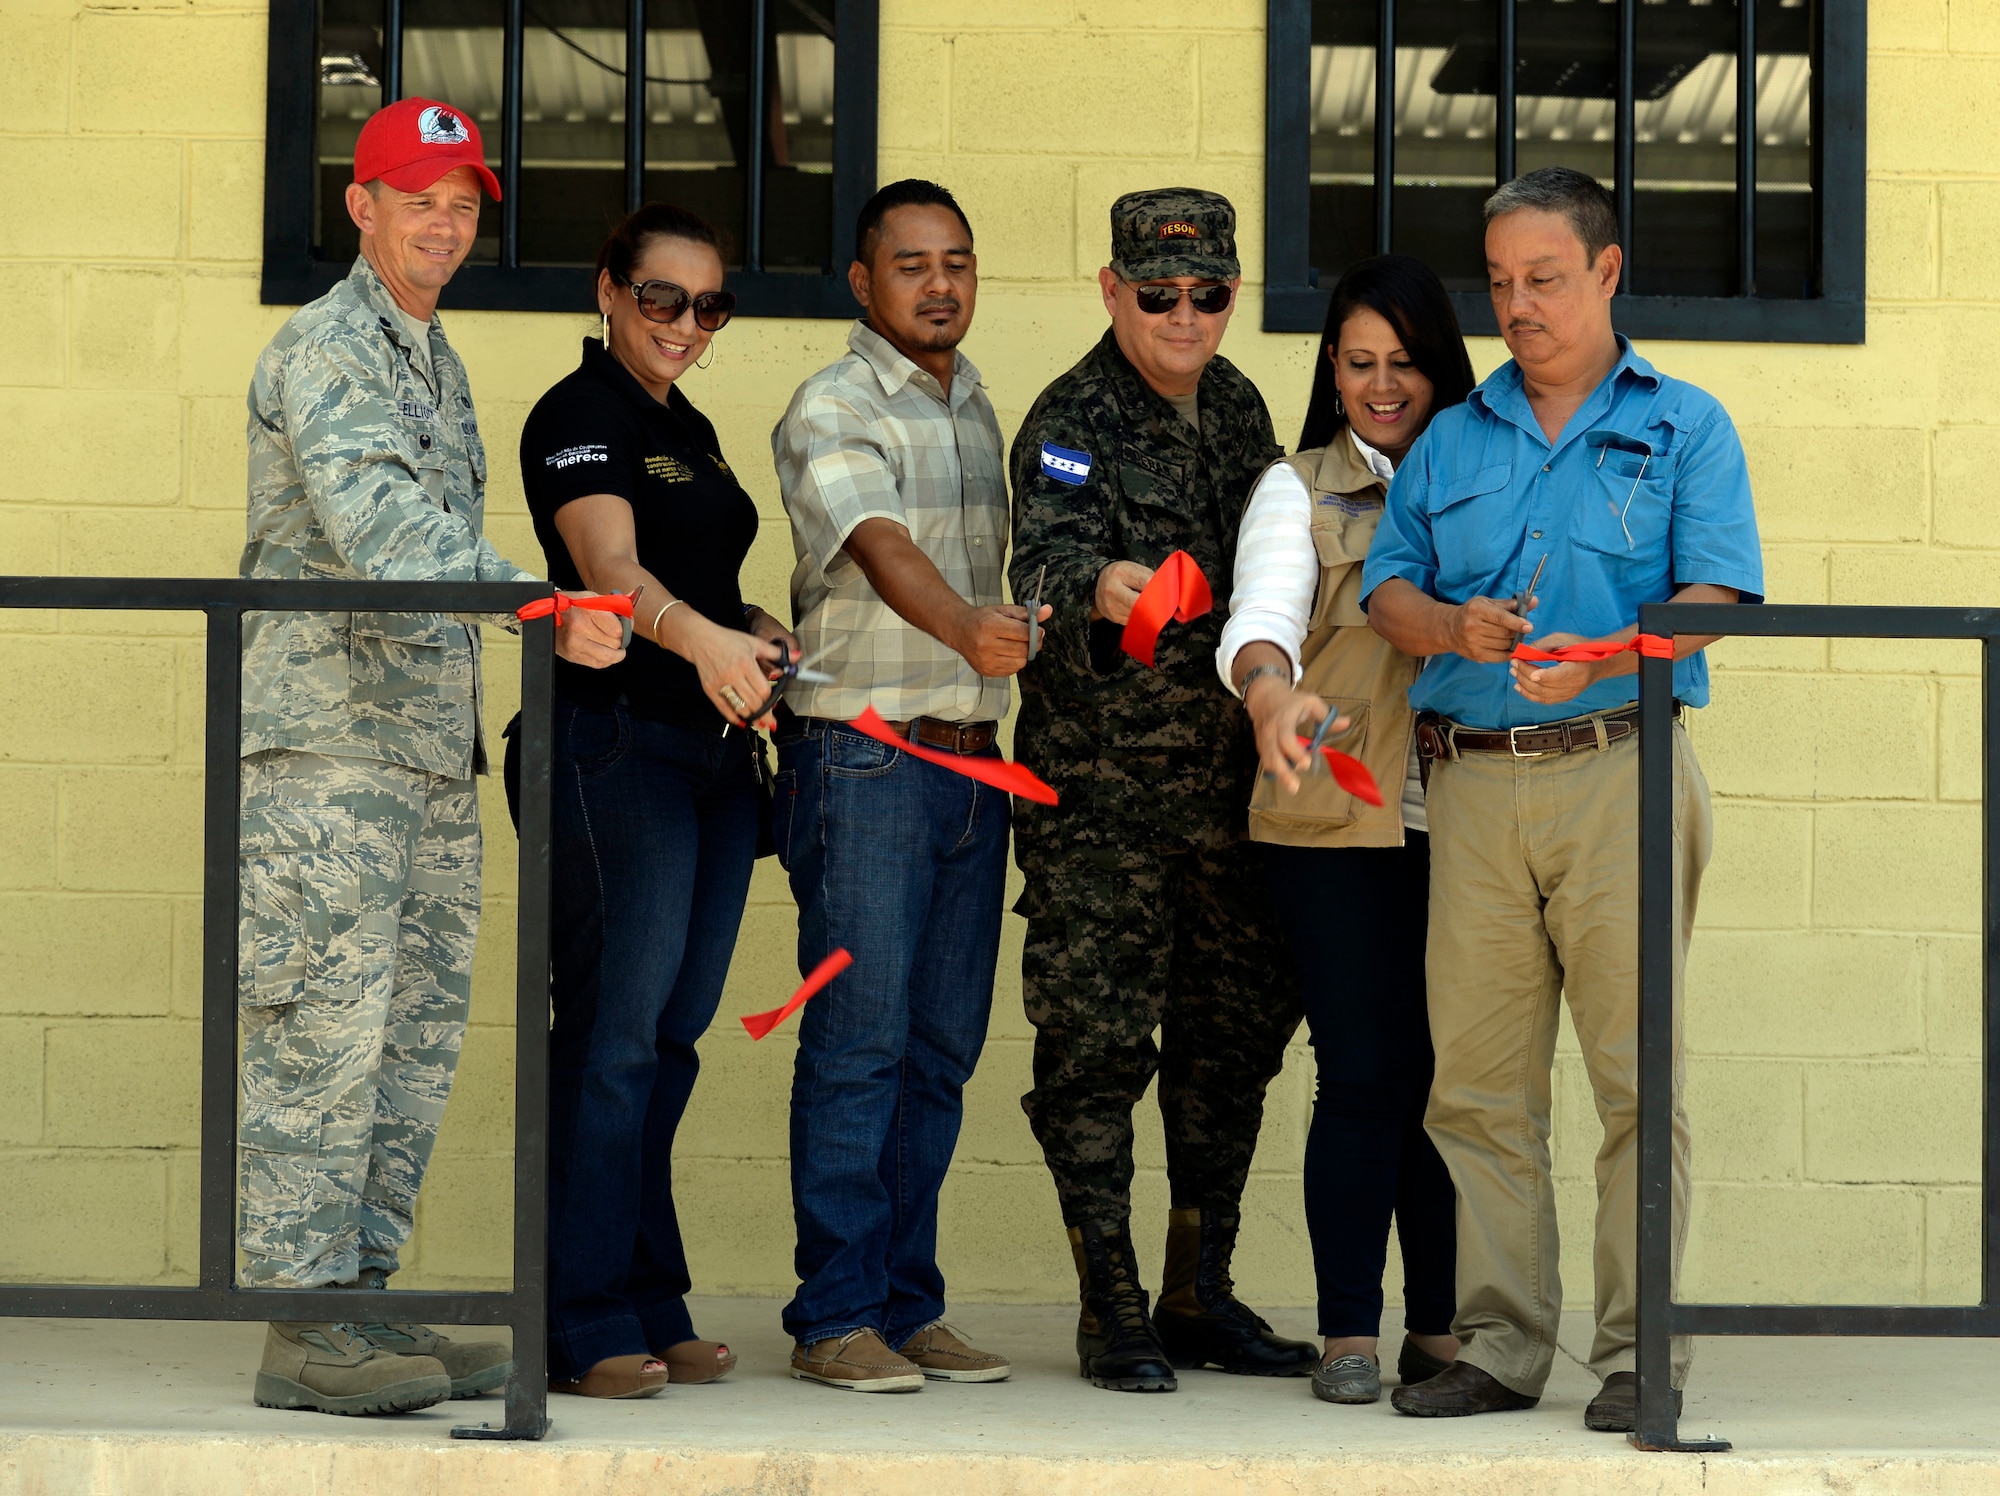 (From left to right) U.S. Air Force Lt. Col. Ryan Elliott, 823rd RED HORSE Squadron deputy commander and New Horizons Honduras exercise commander, out of Hurlburt Field, Fla., and a native of Grove City, Pa.; Director Doris Maradiaga, Colón Department of Education district director; Principal Abraham Ruiz, Gabriela Mistral school; Honduran Army Col. Rafael Deras, 15th Battalion commander: Ghisell Padilla, Colón Department governor; and Trujillo Mayor José Antonio Lainez cut the ribbon of the new two-classroom schoolhouse at the Gabriela Mistral school in Ocotes Alto, July 28, 2015, as part of the ribbon-cutting ceremony. The event marked the official opening of the building which was one of the key projects as part of the New Horizons Honduras 2015 training exercise taking place in around Trujillo, Honduras. New Horizons was launched in the 1980s and is an annual joint humanitarian assistance exercise that U.S. Southern Command conducts with a partner nation in Central America, South America or the Caribbean. The exercise improves joint training readiness of U.S. and partner nation civil engineers, medical professionals and support personnel through humanitarian assistance activities. (U.S. Air Force photo by Capt. David J. Murphy/Released)